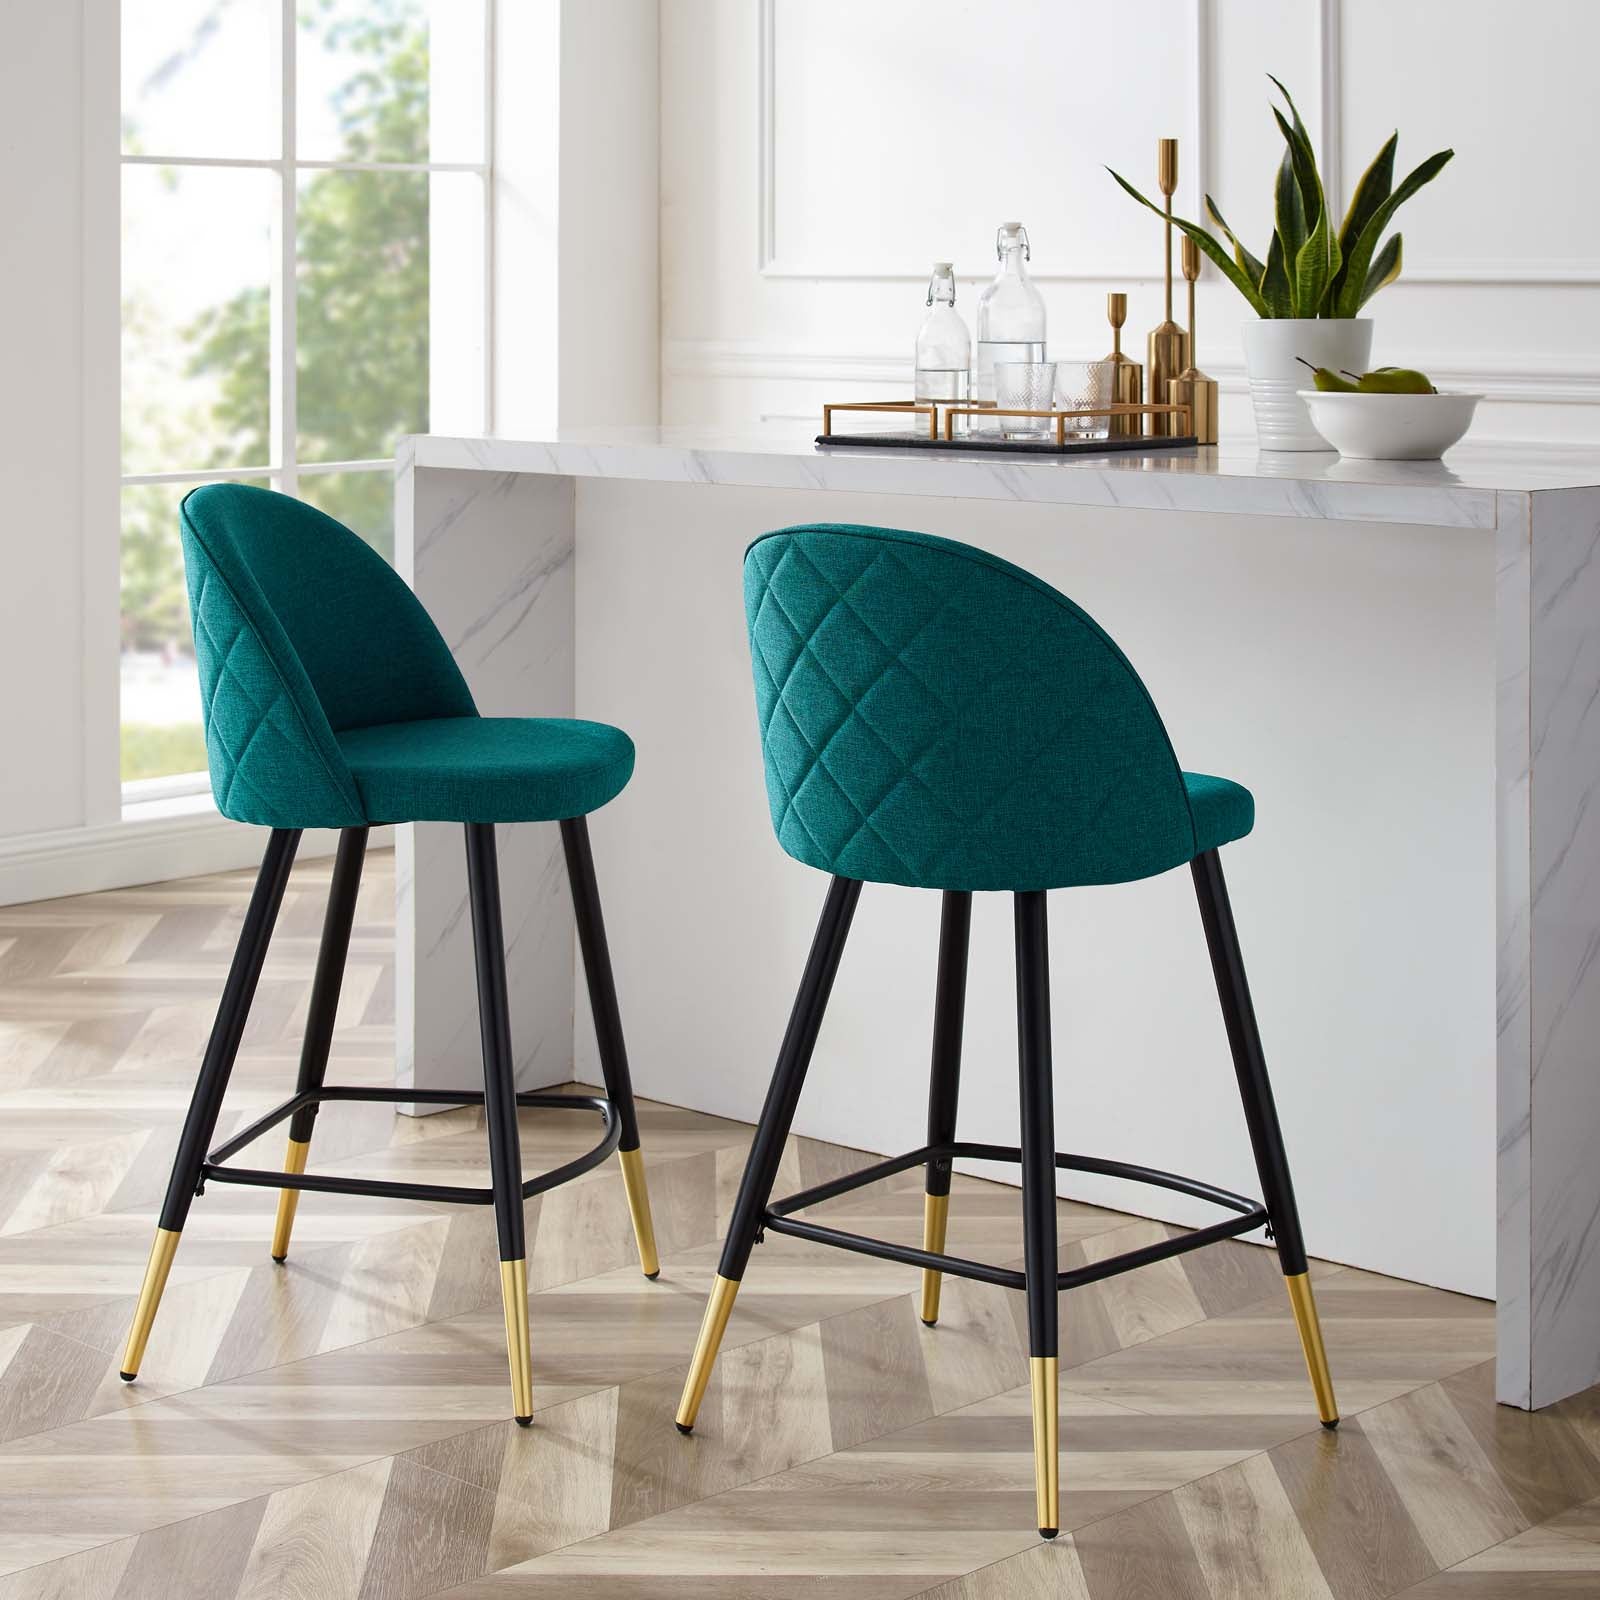 Modway Barstools - Cordial Fabric Counter Stools - ( Set of 2 ) Teal